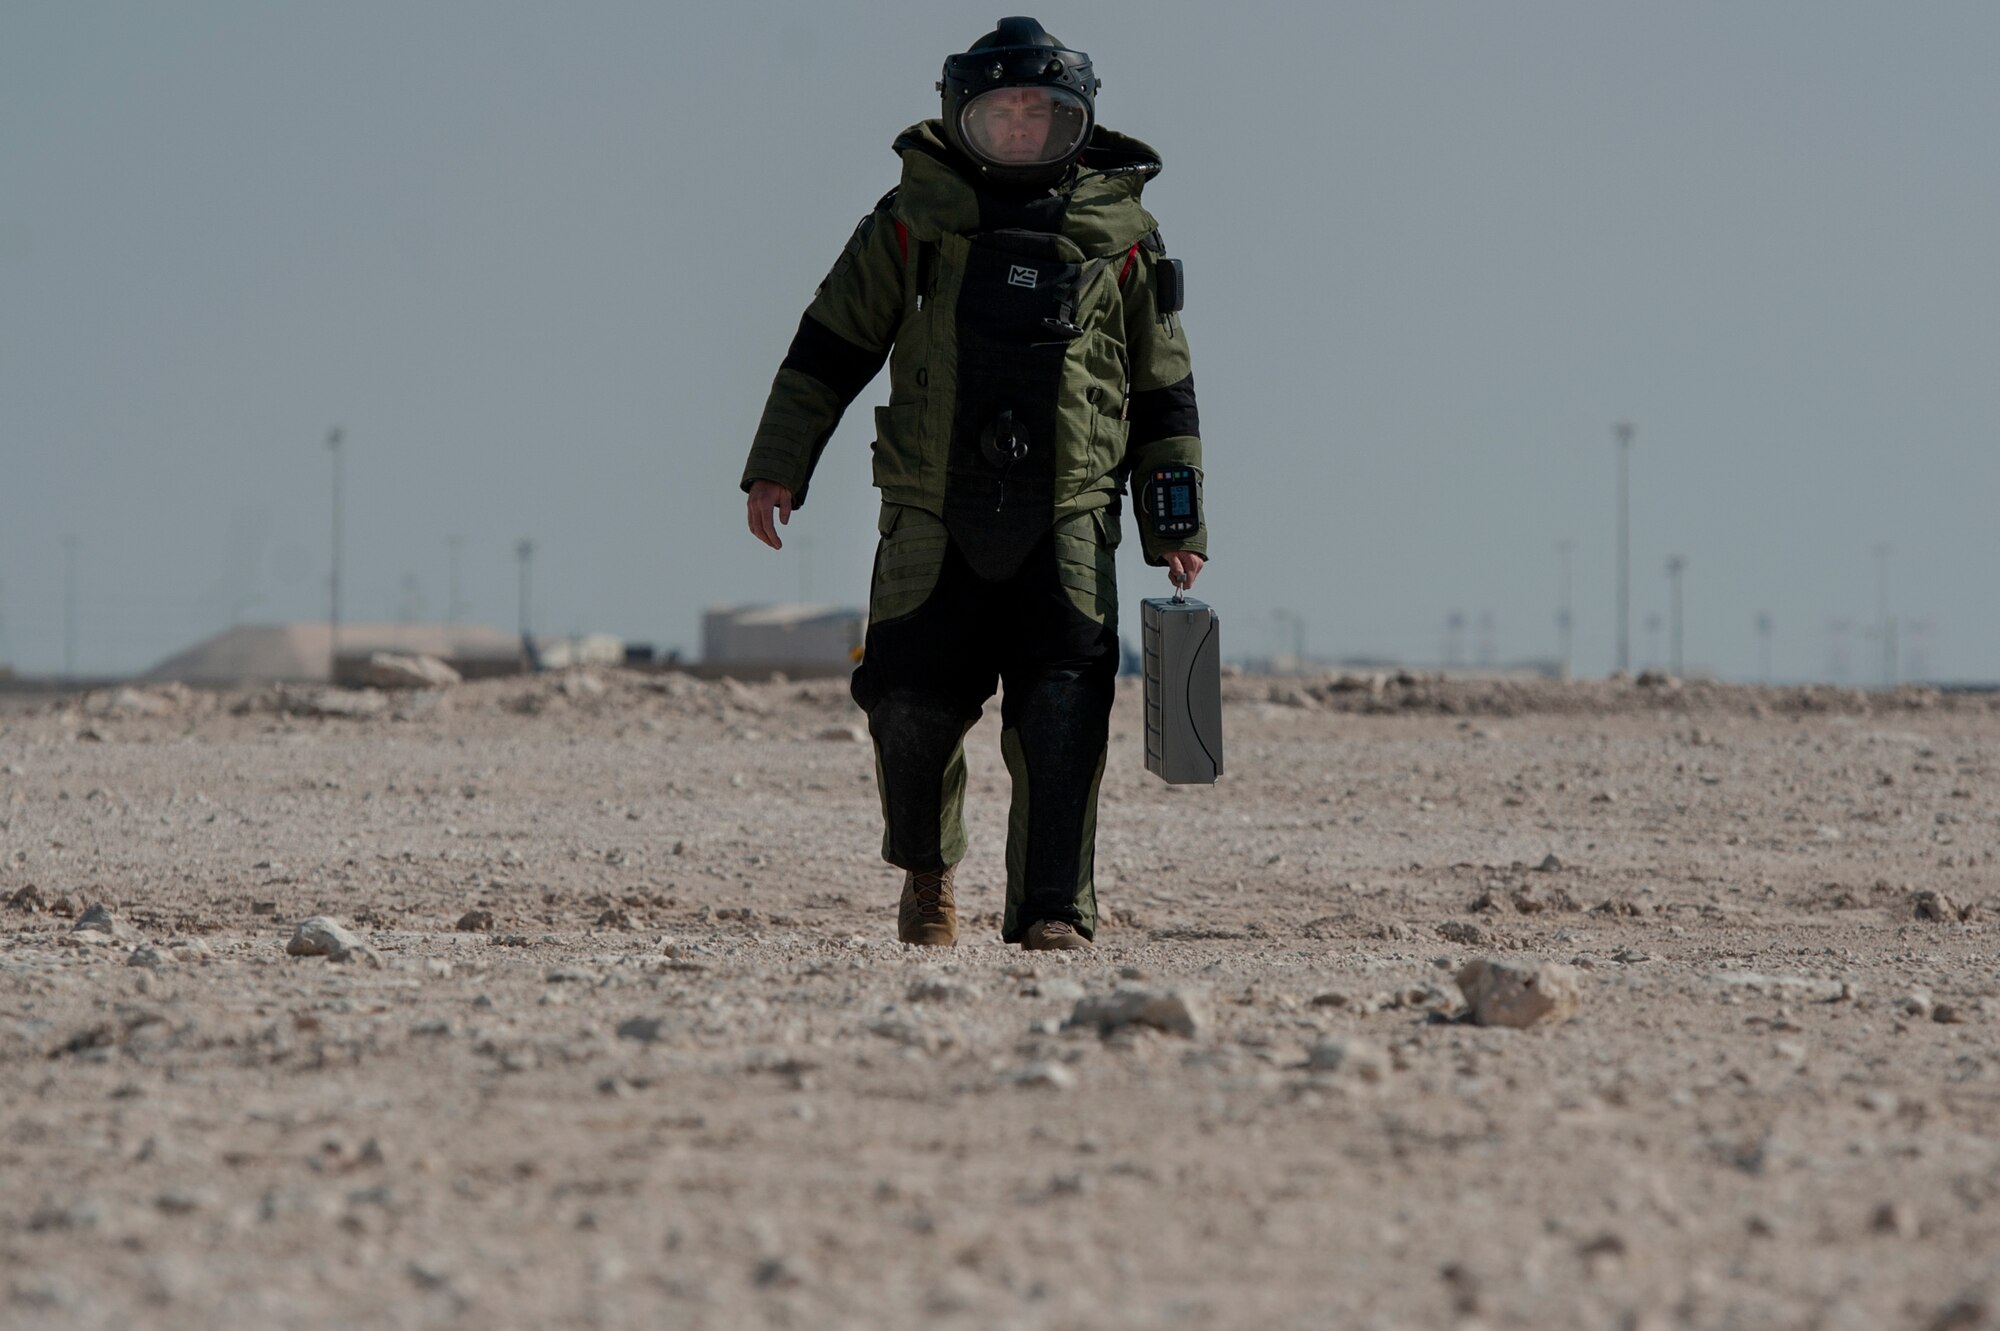 Tech. Sgt. Michael Case, 379th Expeditionary Civil Engineer Squadron explosive, ordnance, and disposal (EOD) team member, approaches a simulated vehicle borne improvised explosive device (VBIED) while wearing an EOD 10 Bomb Suit, during a VBIED response training exercise Dec. 18, 2018, at Al Udeid Air Base, Qatar. Training participants utilized an F6A robotic platform, a bomb suit, and other specific tools to disrupt a VBIED during the exercise. (U.S. Air Force photo by Tech. Sgt. Christopher Hubenthal)